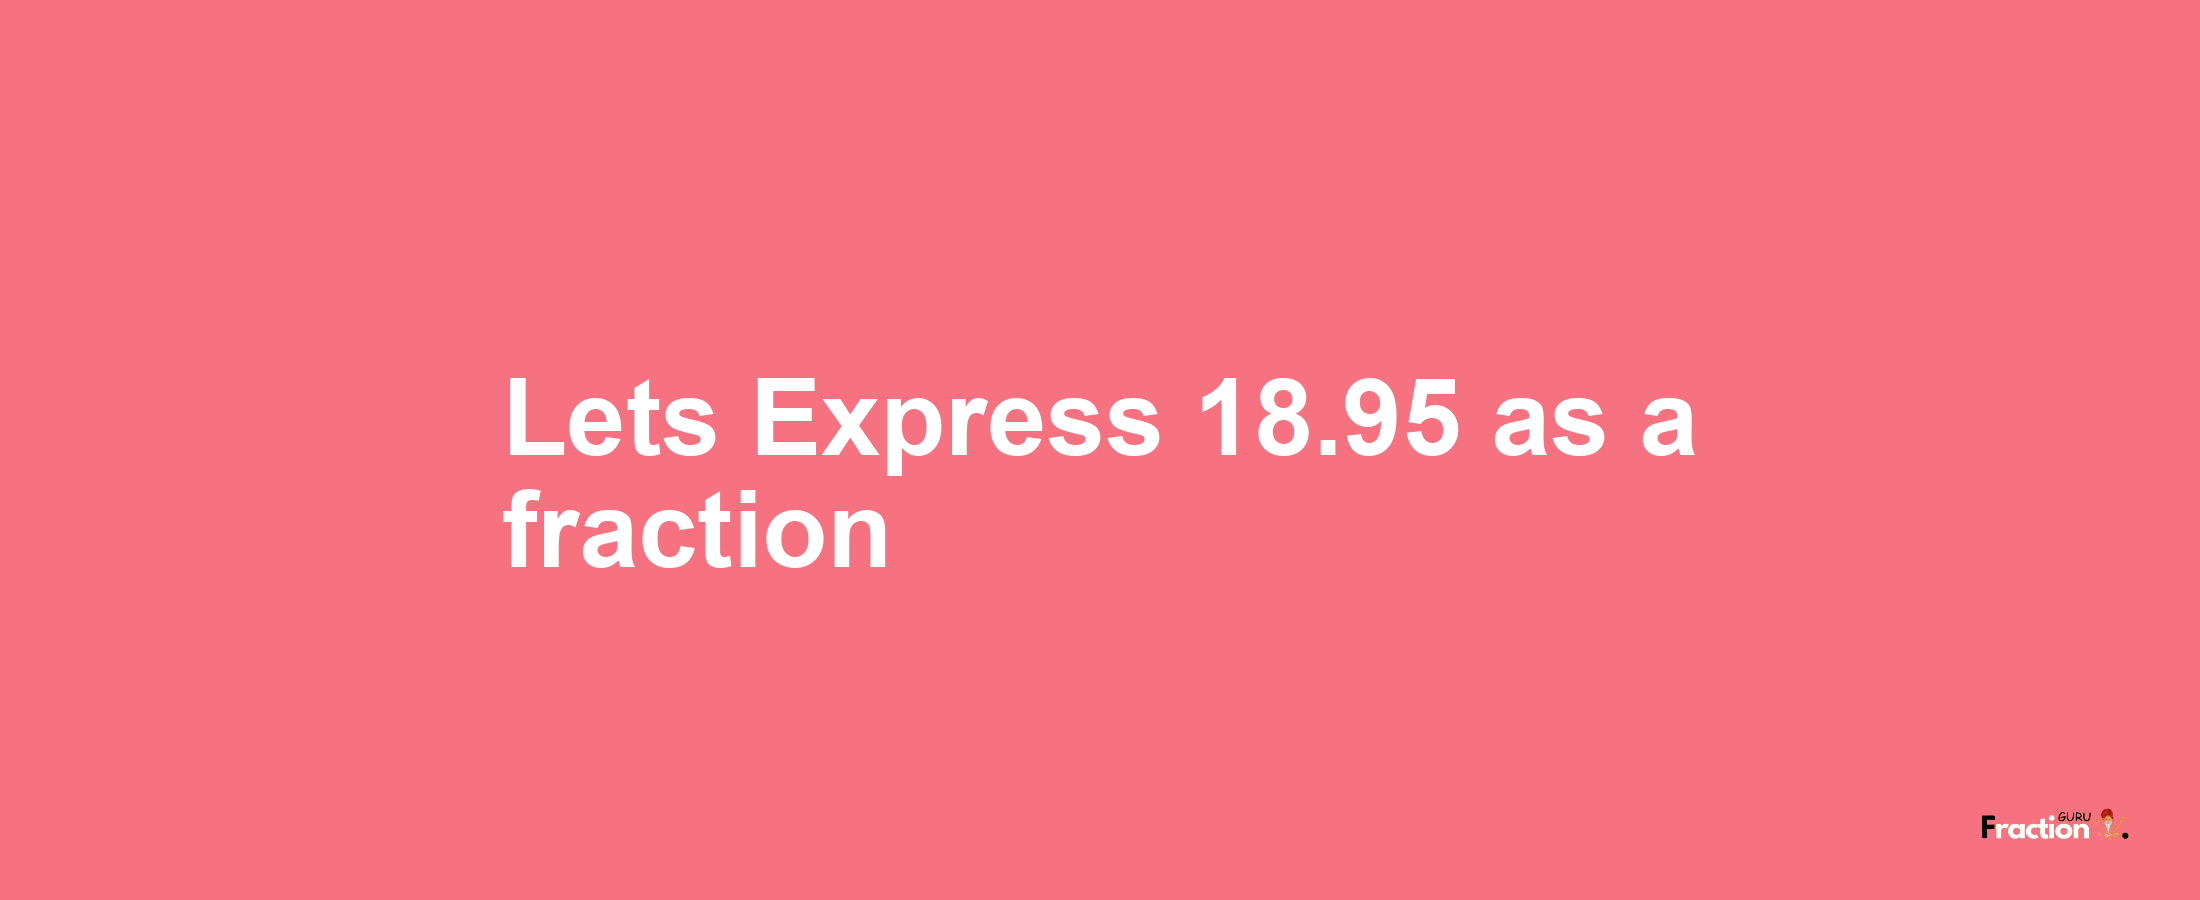 Lets Express 18.95 as afraction